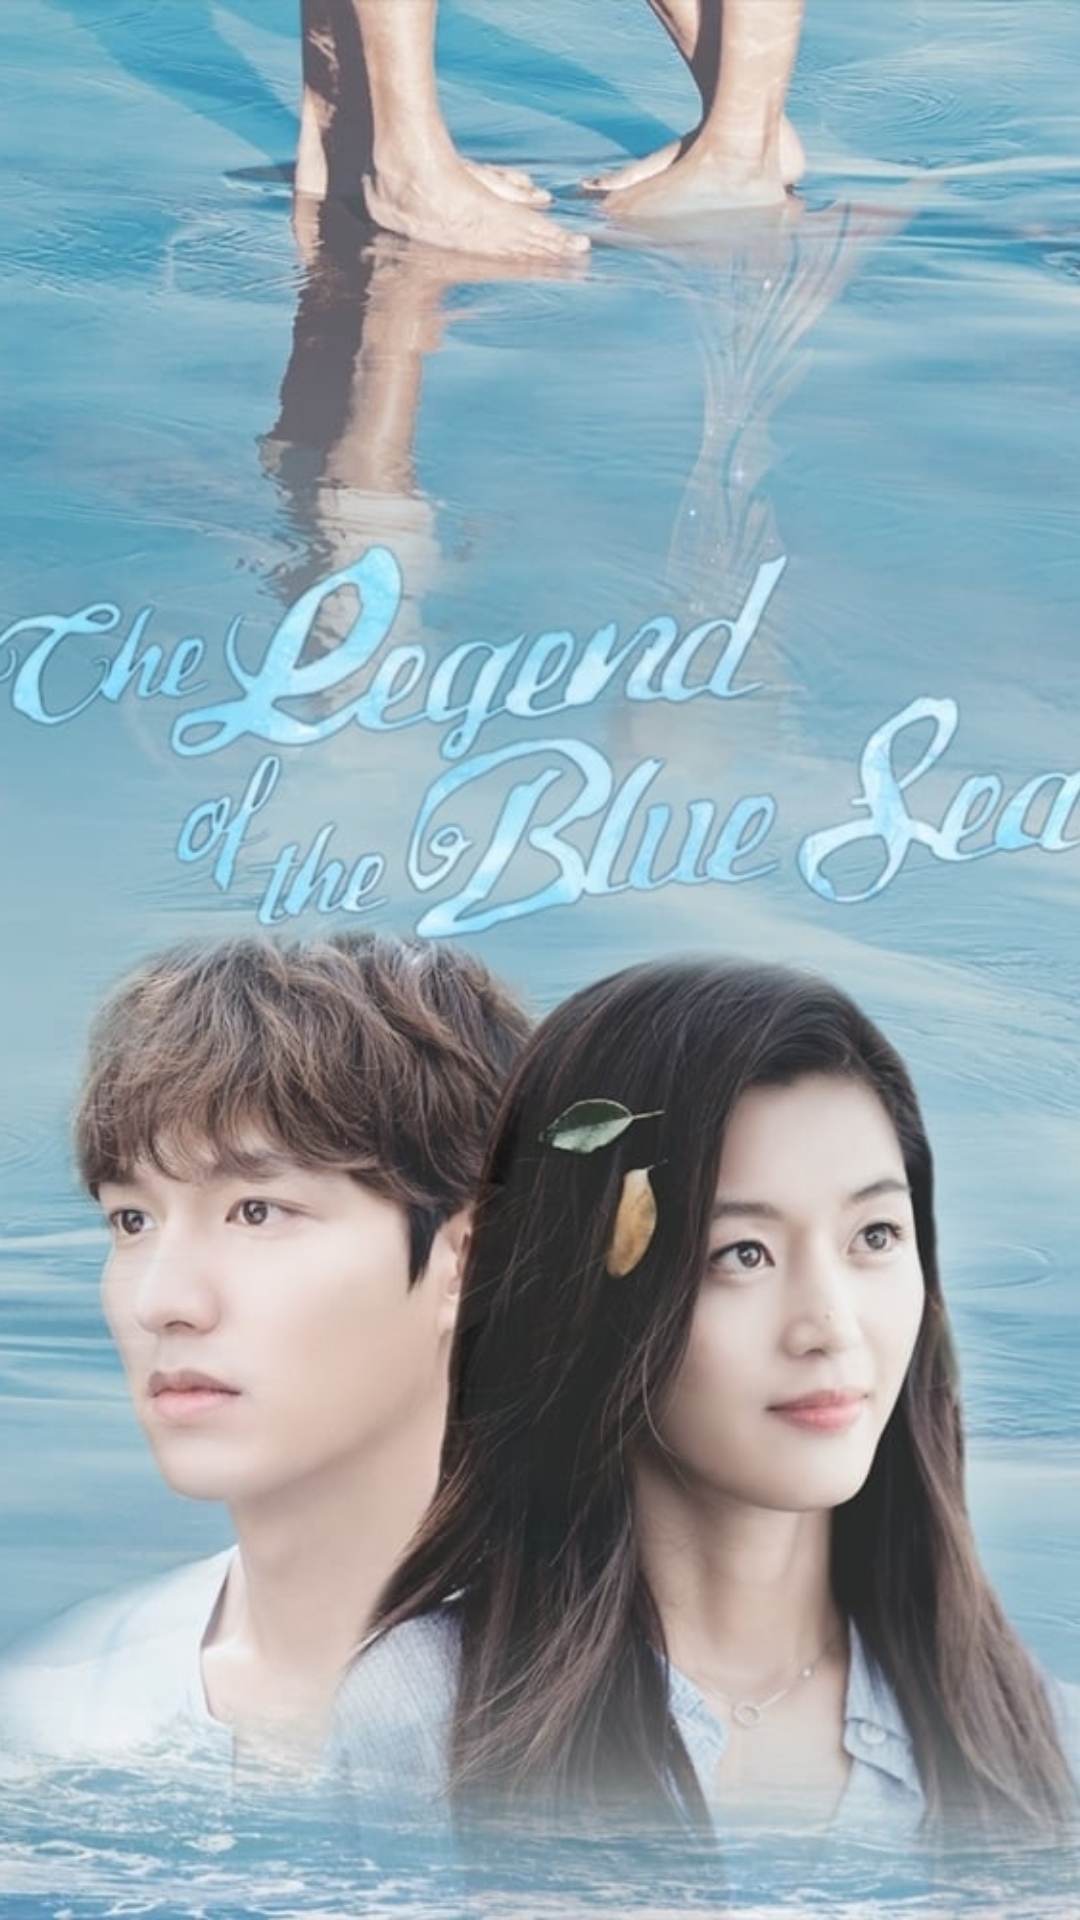 The King: Eternal Monarch to My Love from the star: K-dramas that will  whisk you